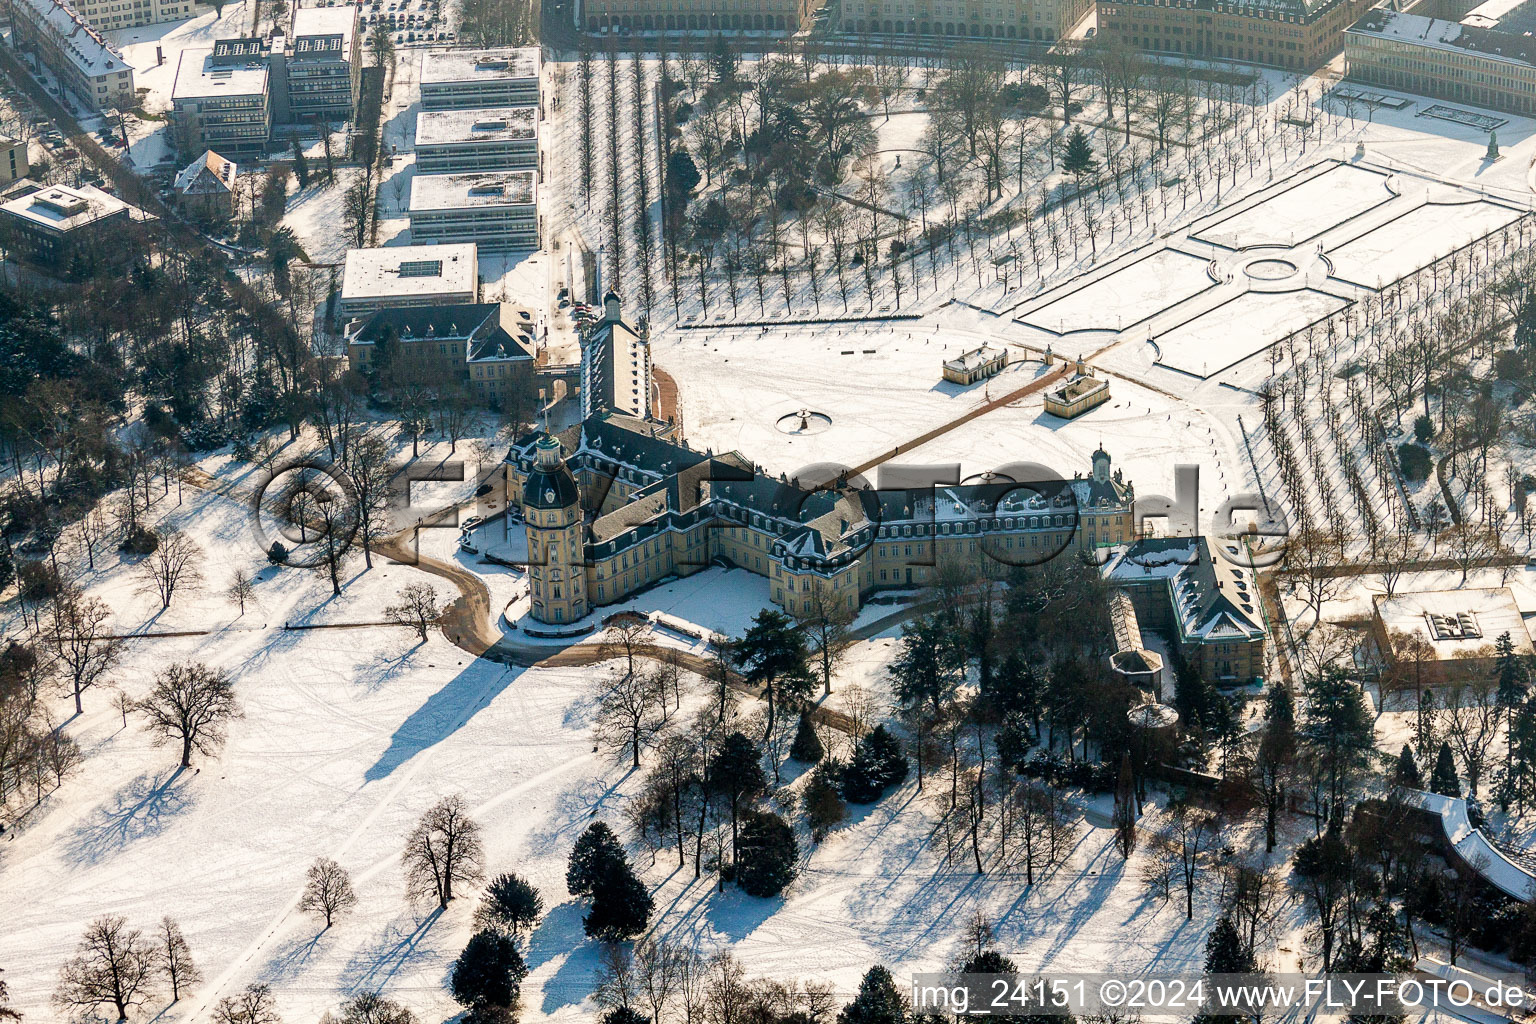 Wintry snowy Building complex in the park of the castle Schloss Karlsruhe in Karlsruhe in the state Baden-Wurttemberg, Germany